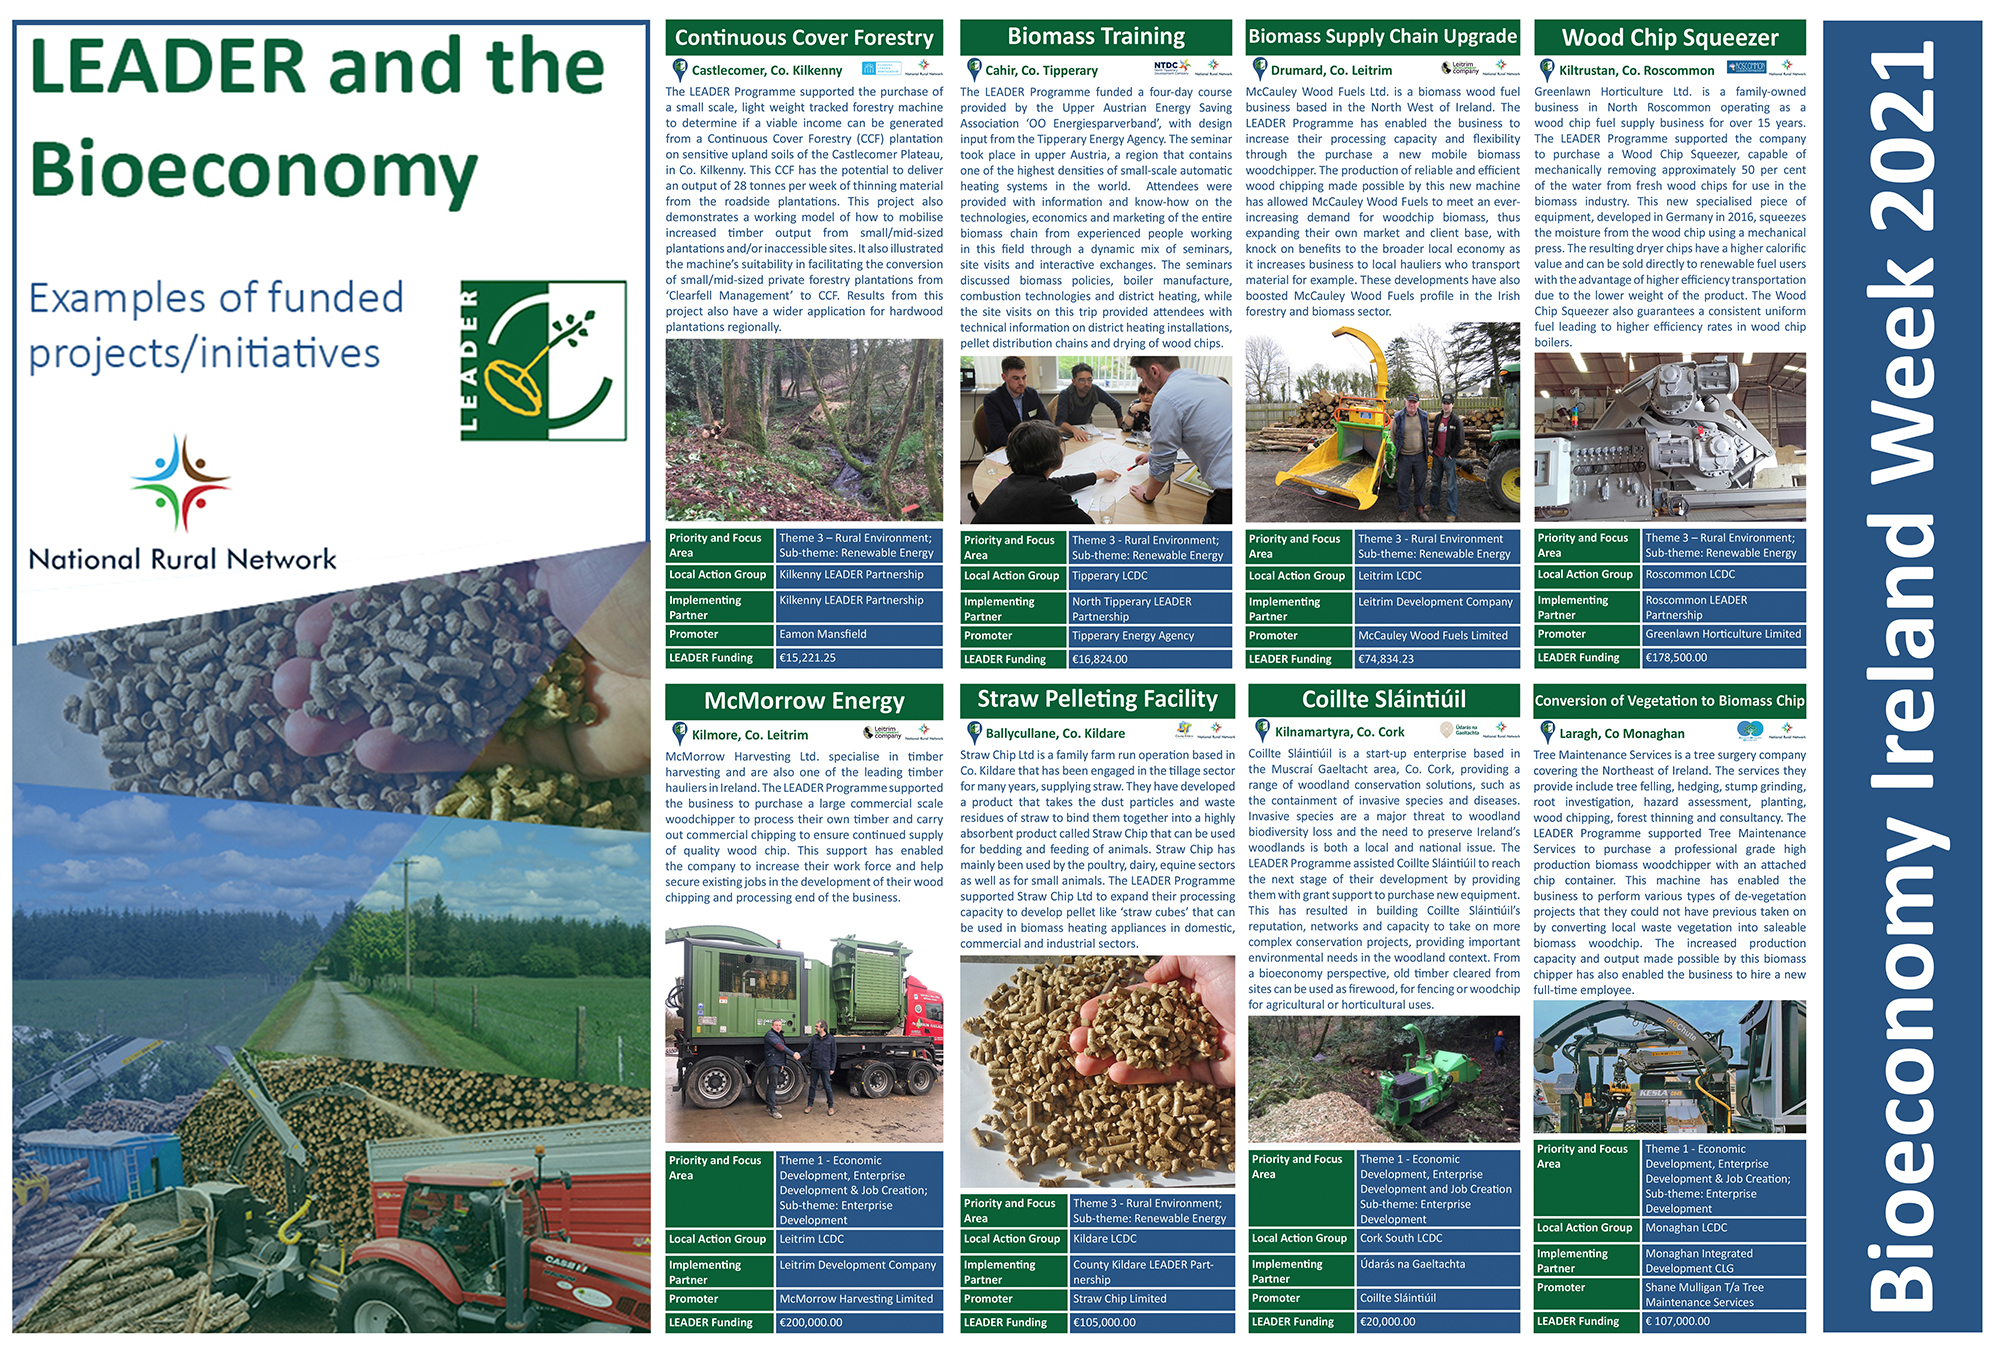 ‘LEADER and the Bioeconomy’ 2021 Booklet